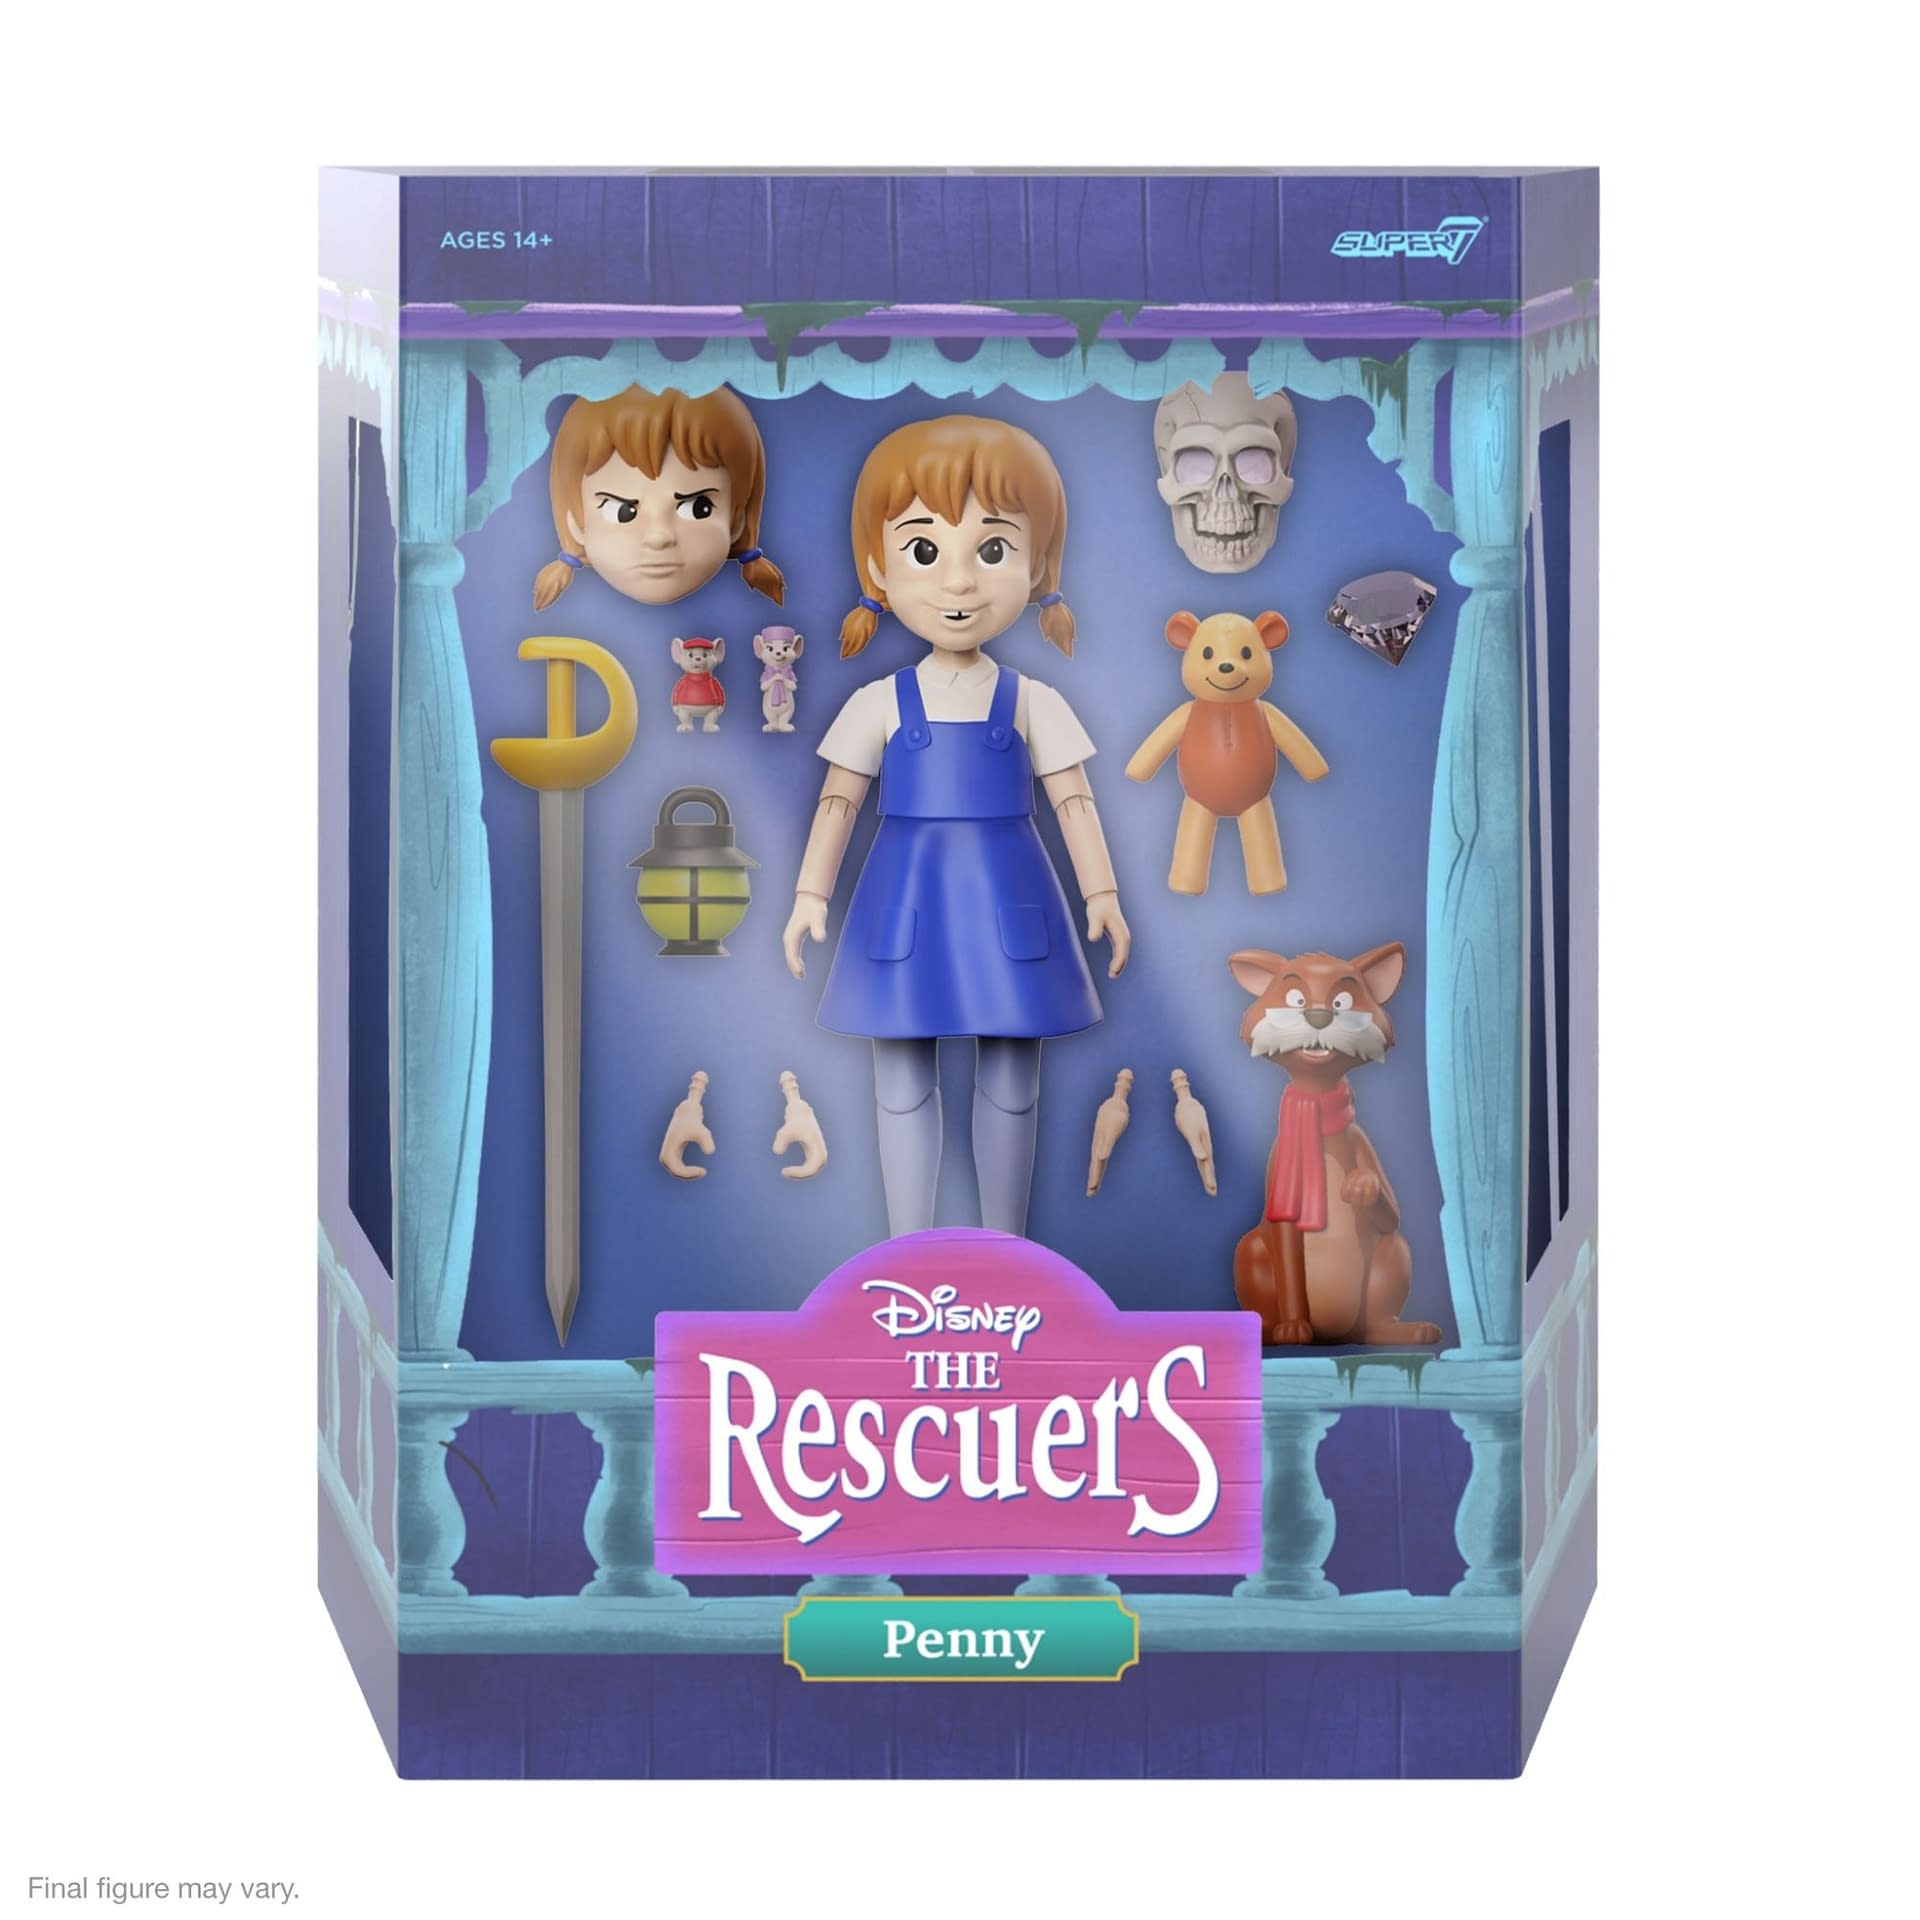 Disney's The Rescuers Comes to Life with Super7 ULTIMATES Line 